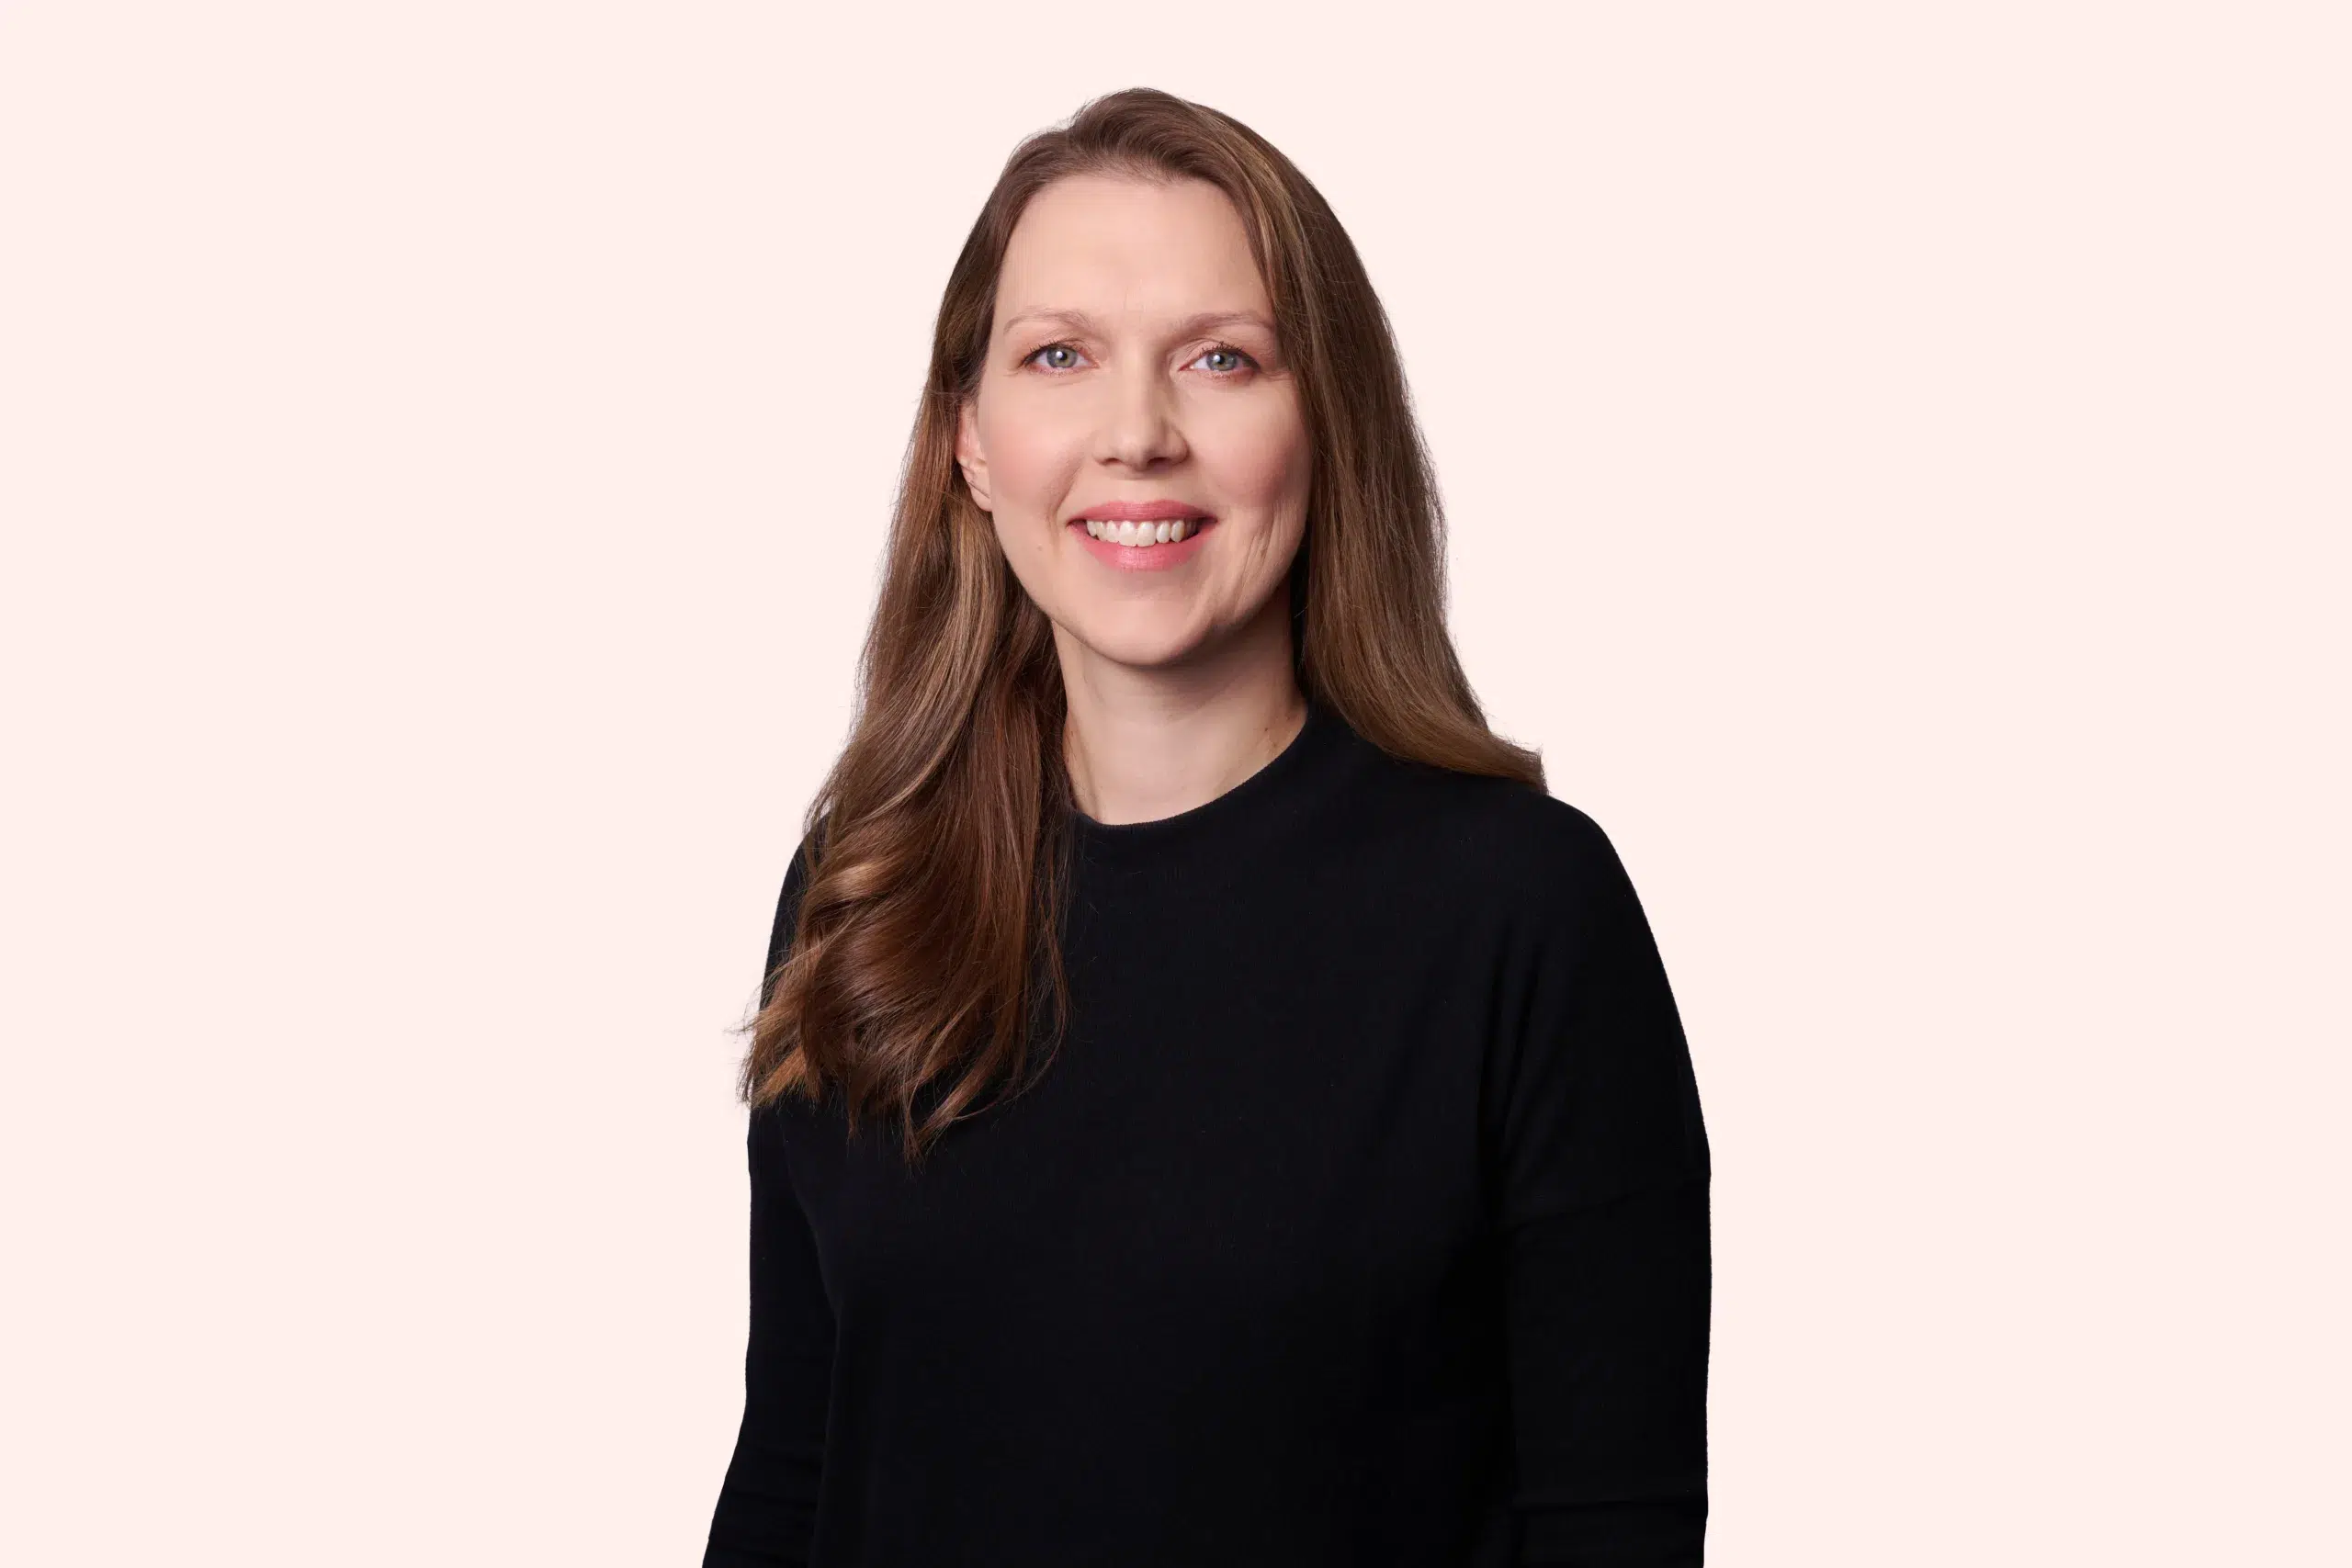 Kairi Rosen is a project manager at Bauwise